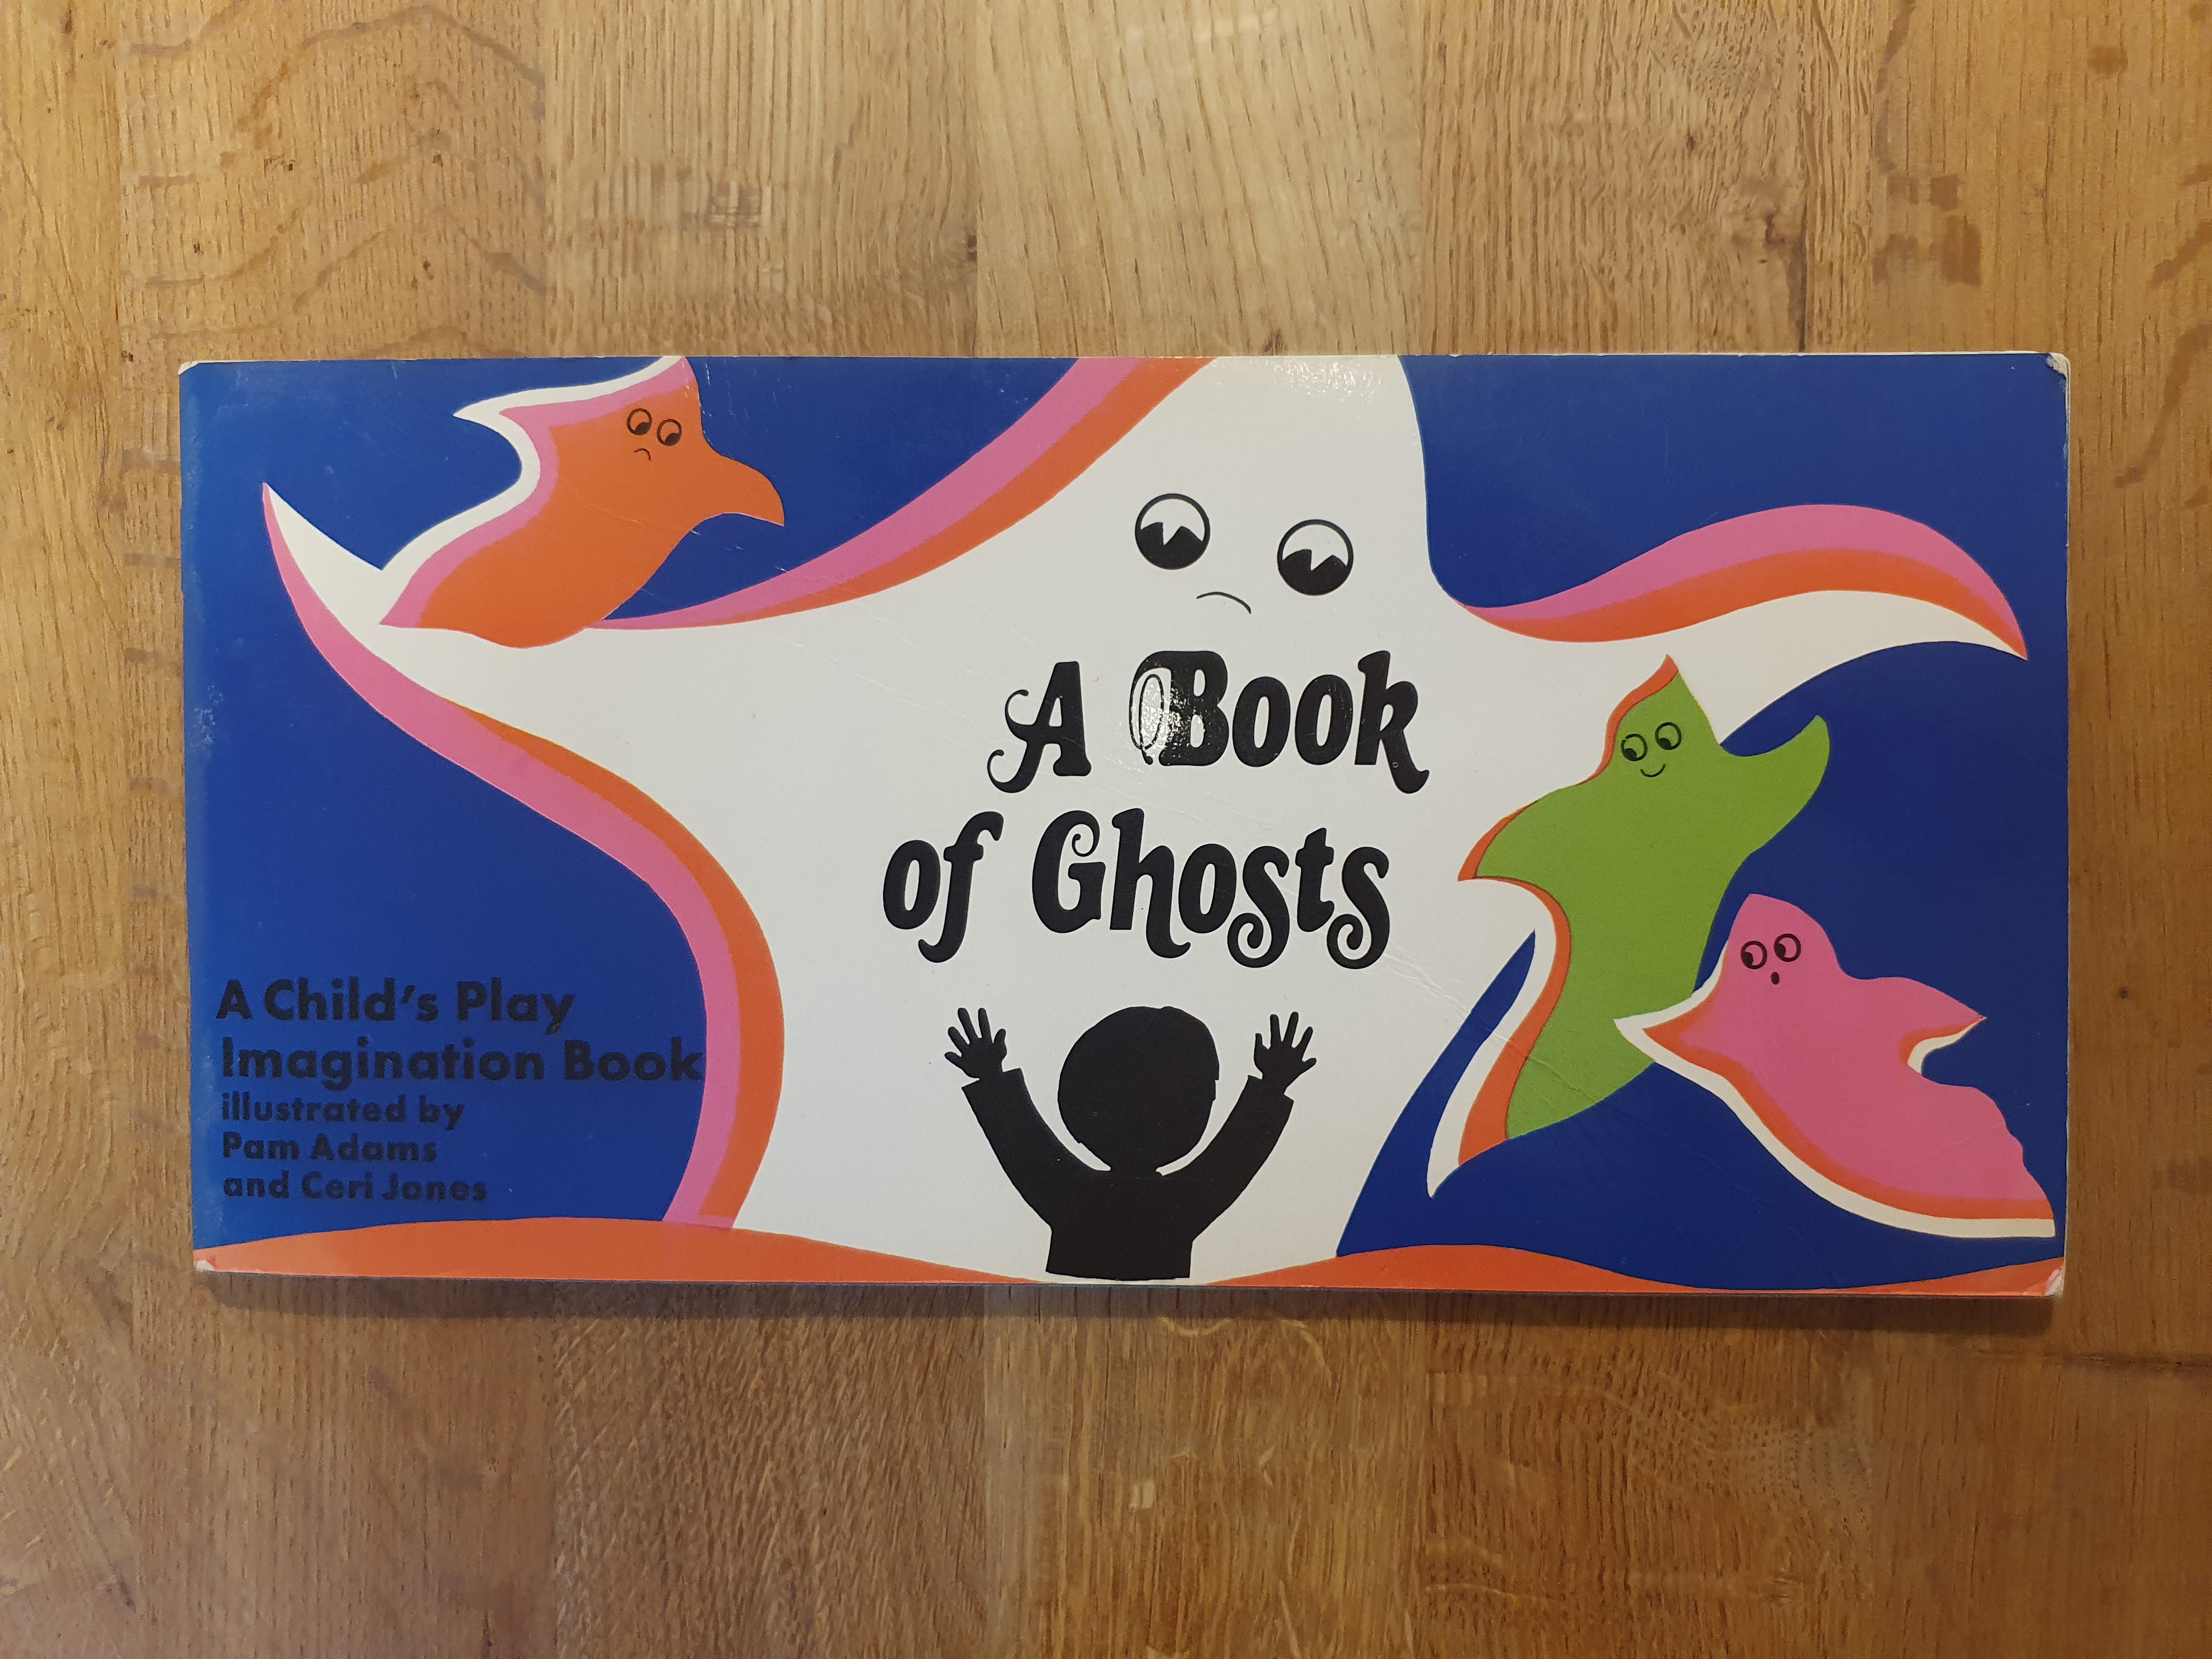 A Book of Ghosts by Pam Adams and Ceri Jones